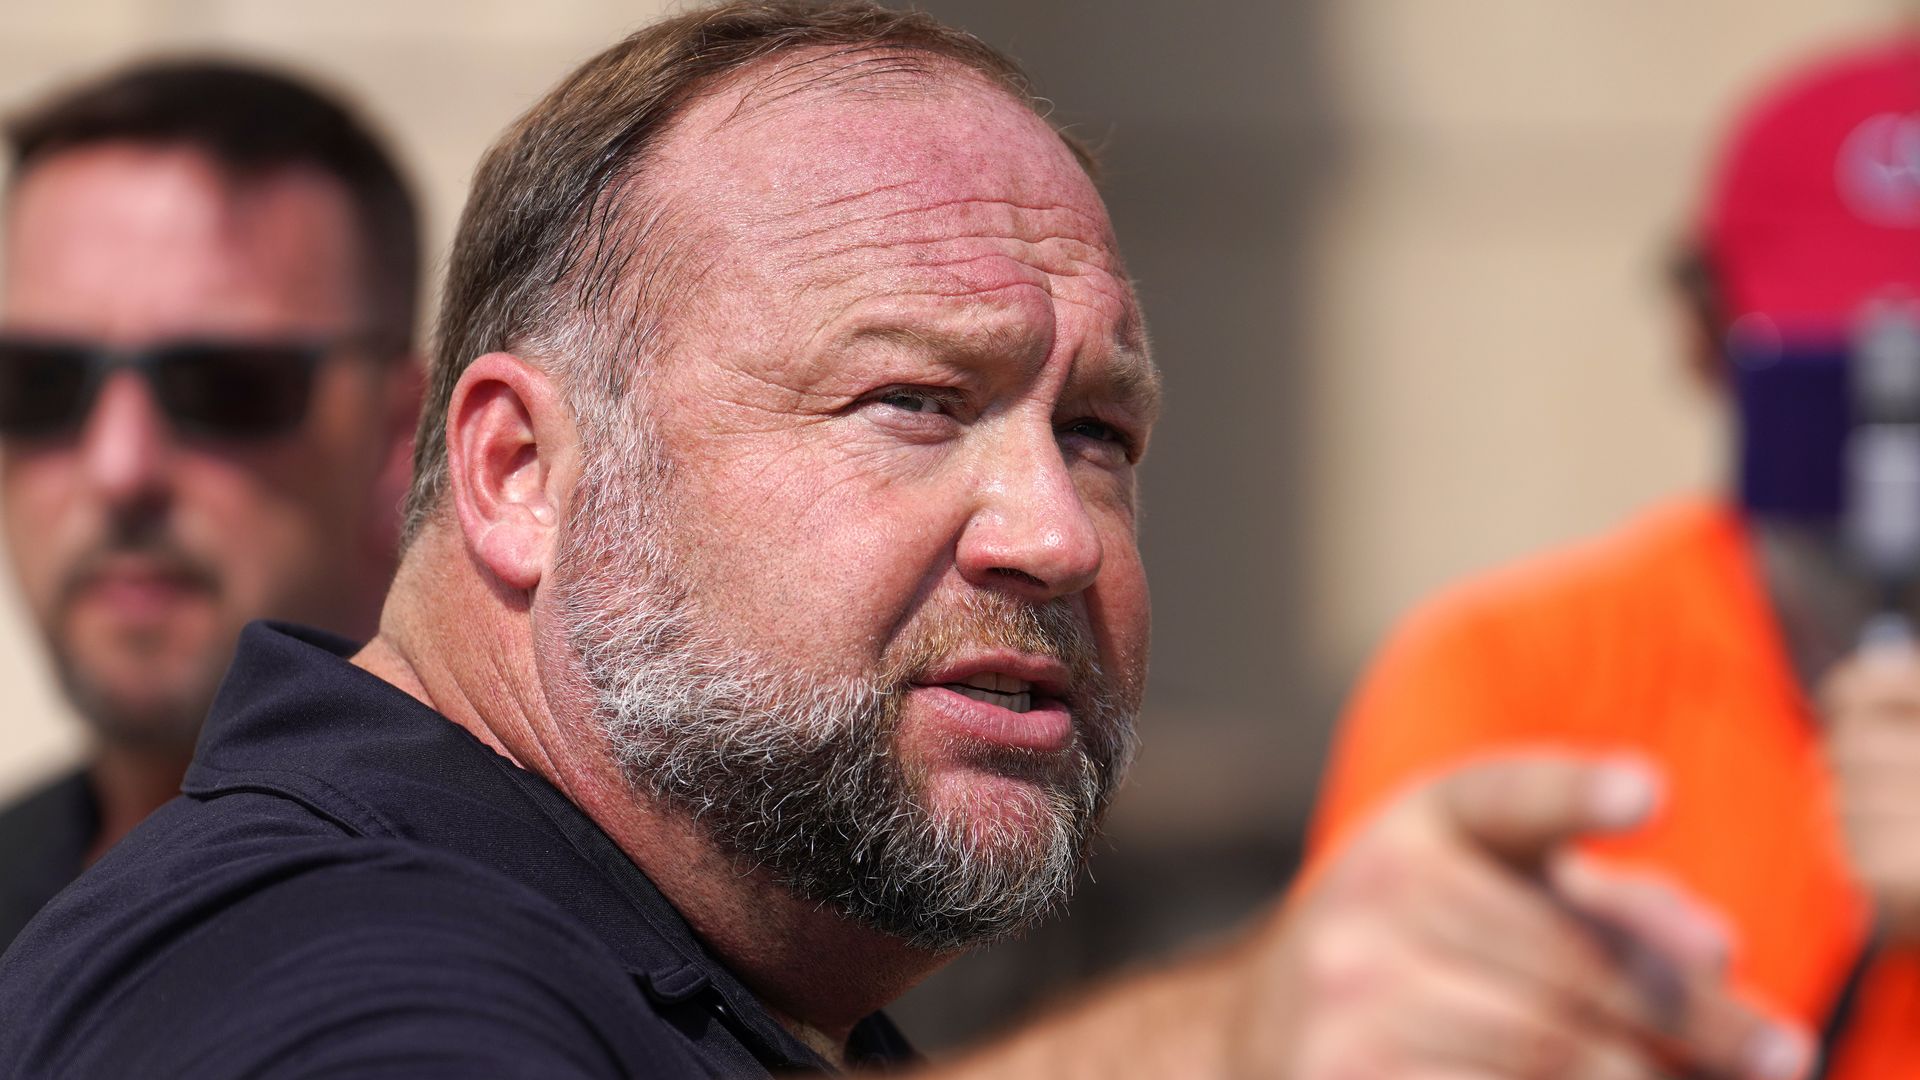 Alex Jones speaking outside a courthouse in Waterbury, Connecticut, in September 2020.